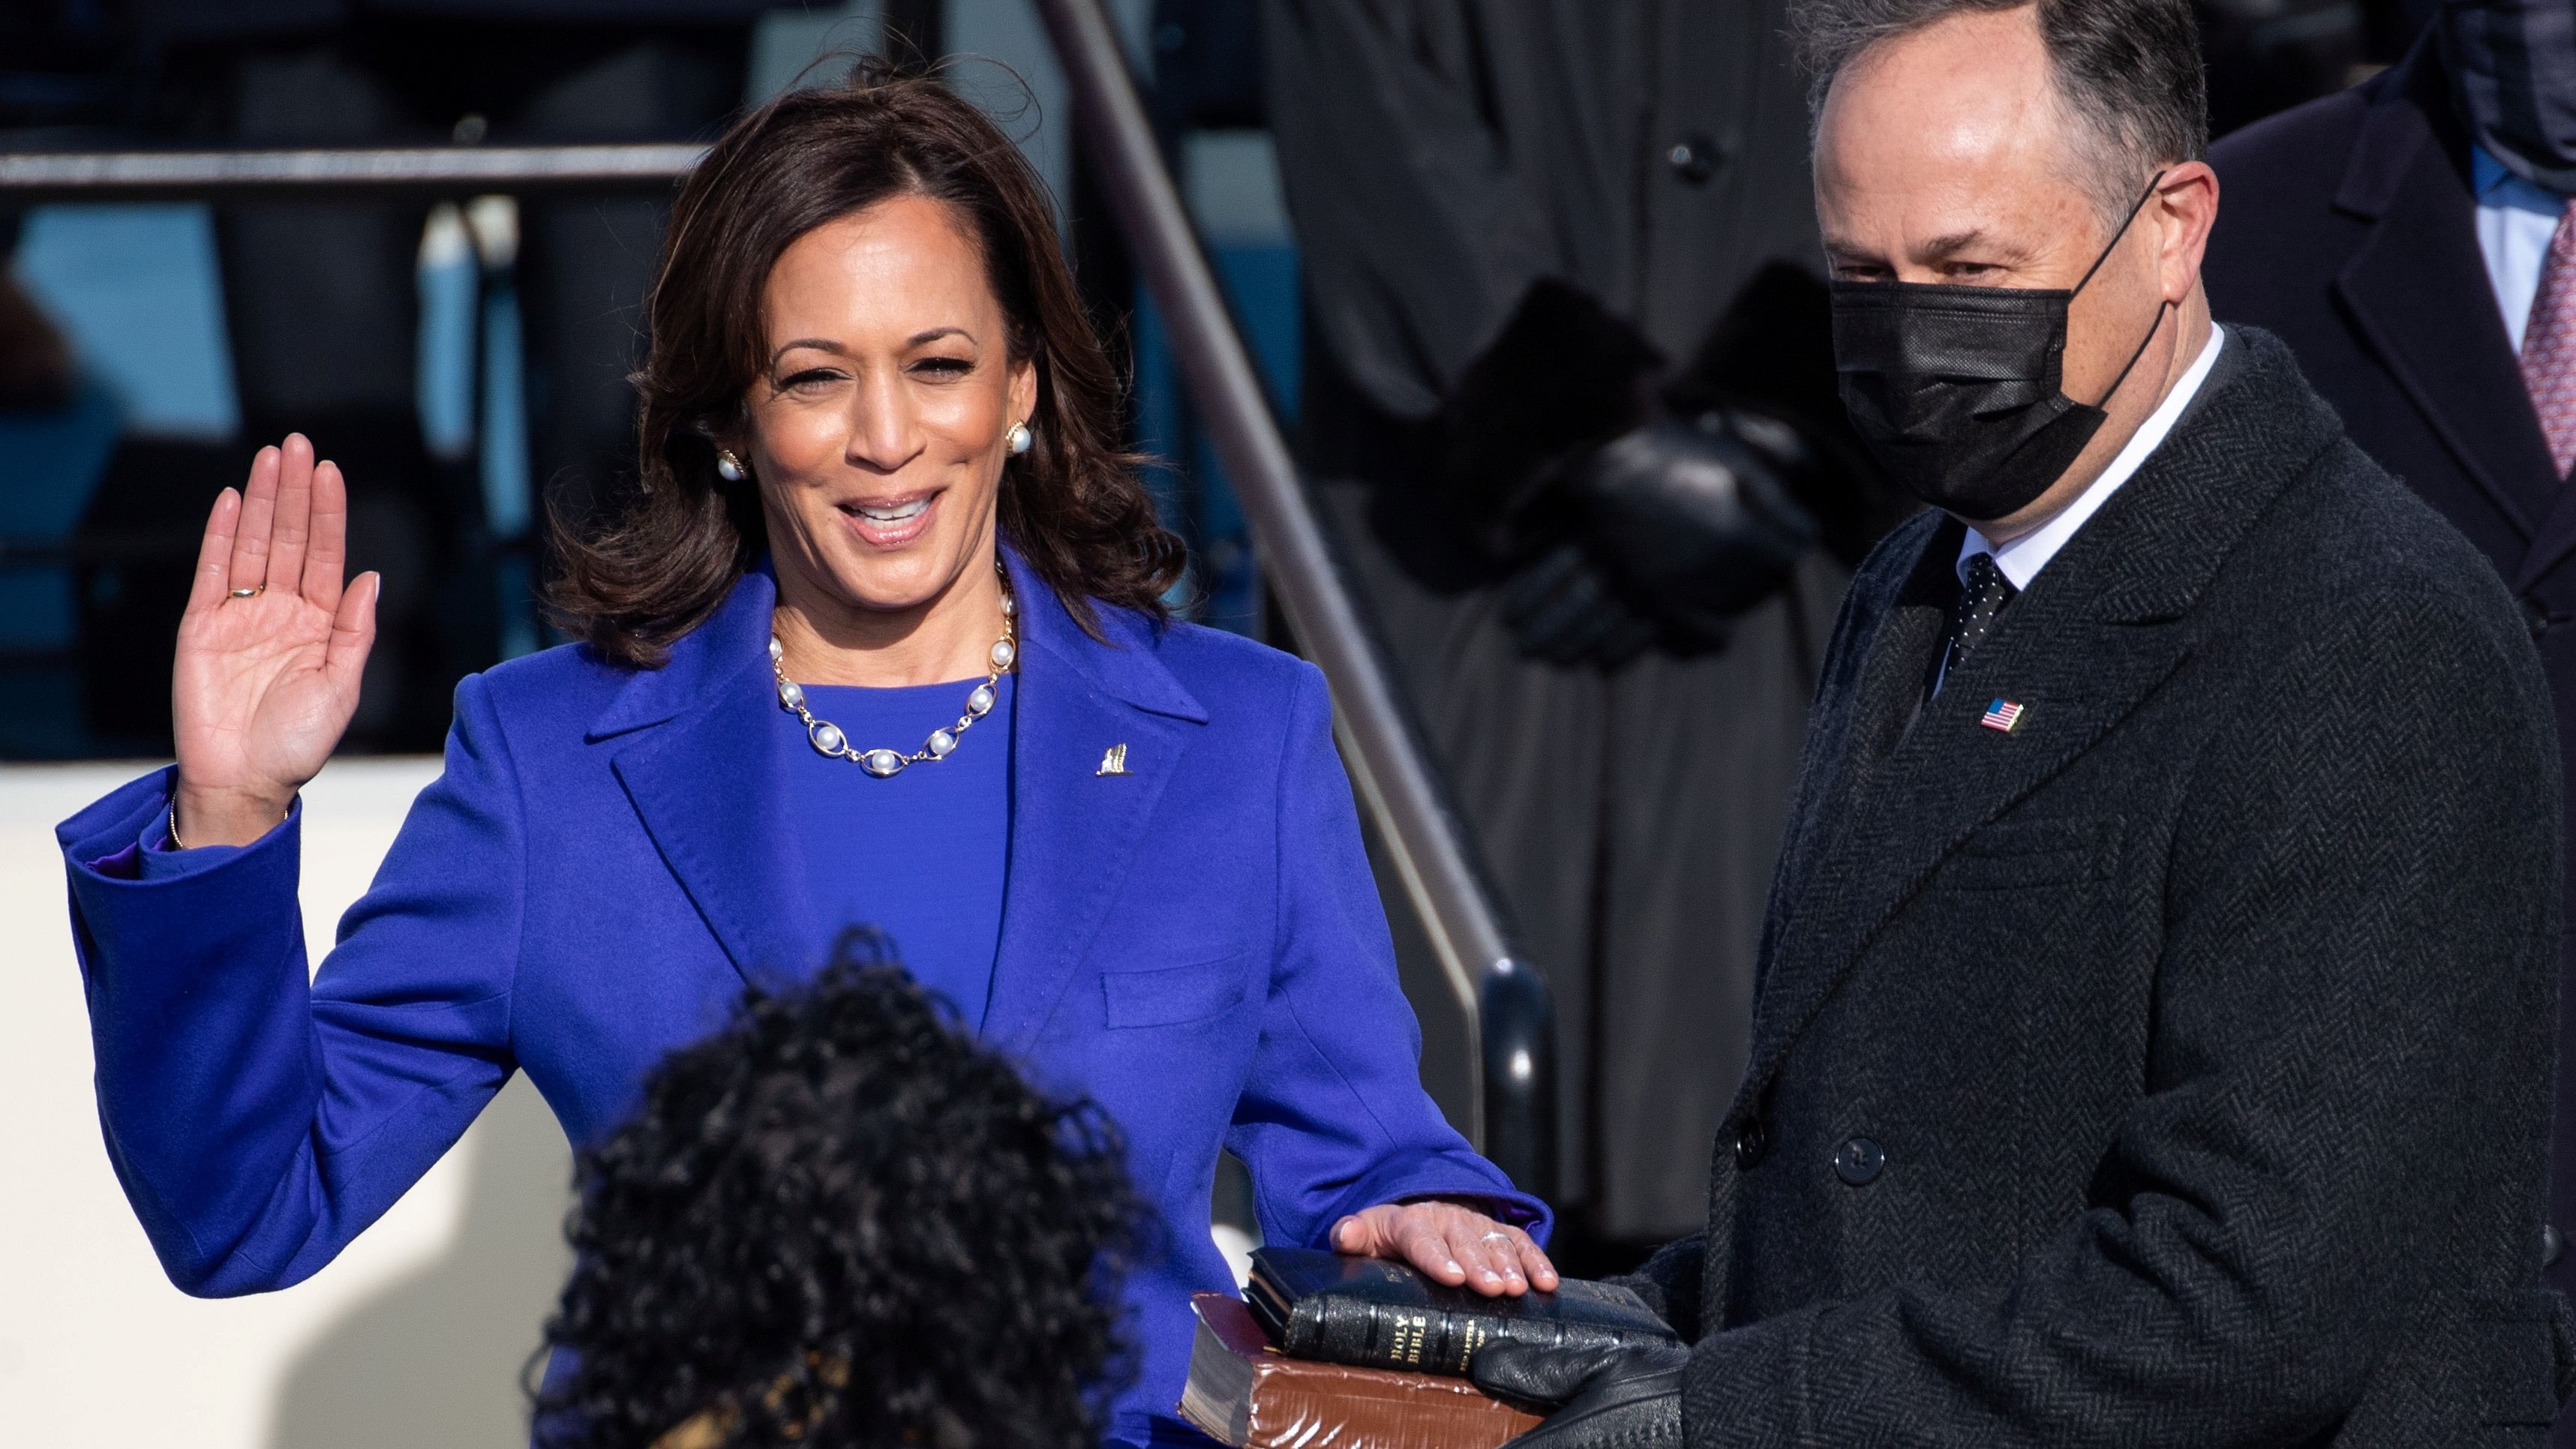 Kamala Harris is sworn in as Vice President as her spouse Doug Emhoff holds a bible during the 59th Presidential Inauguration at in Washington. Credit: Reuters